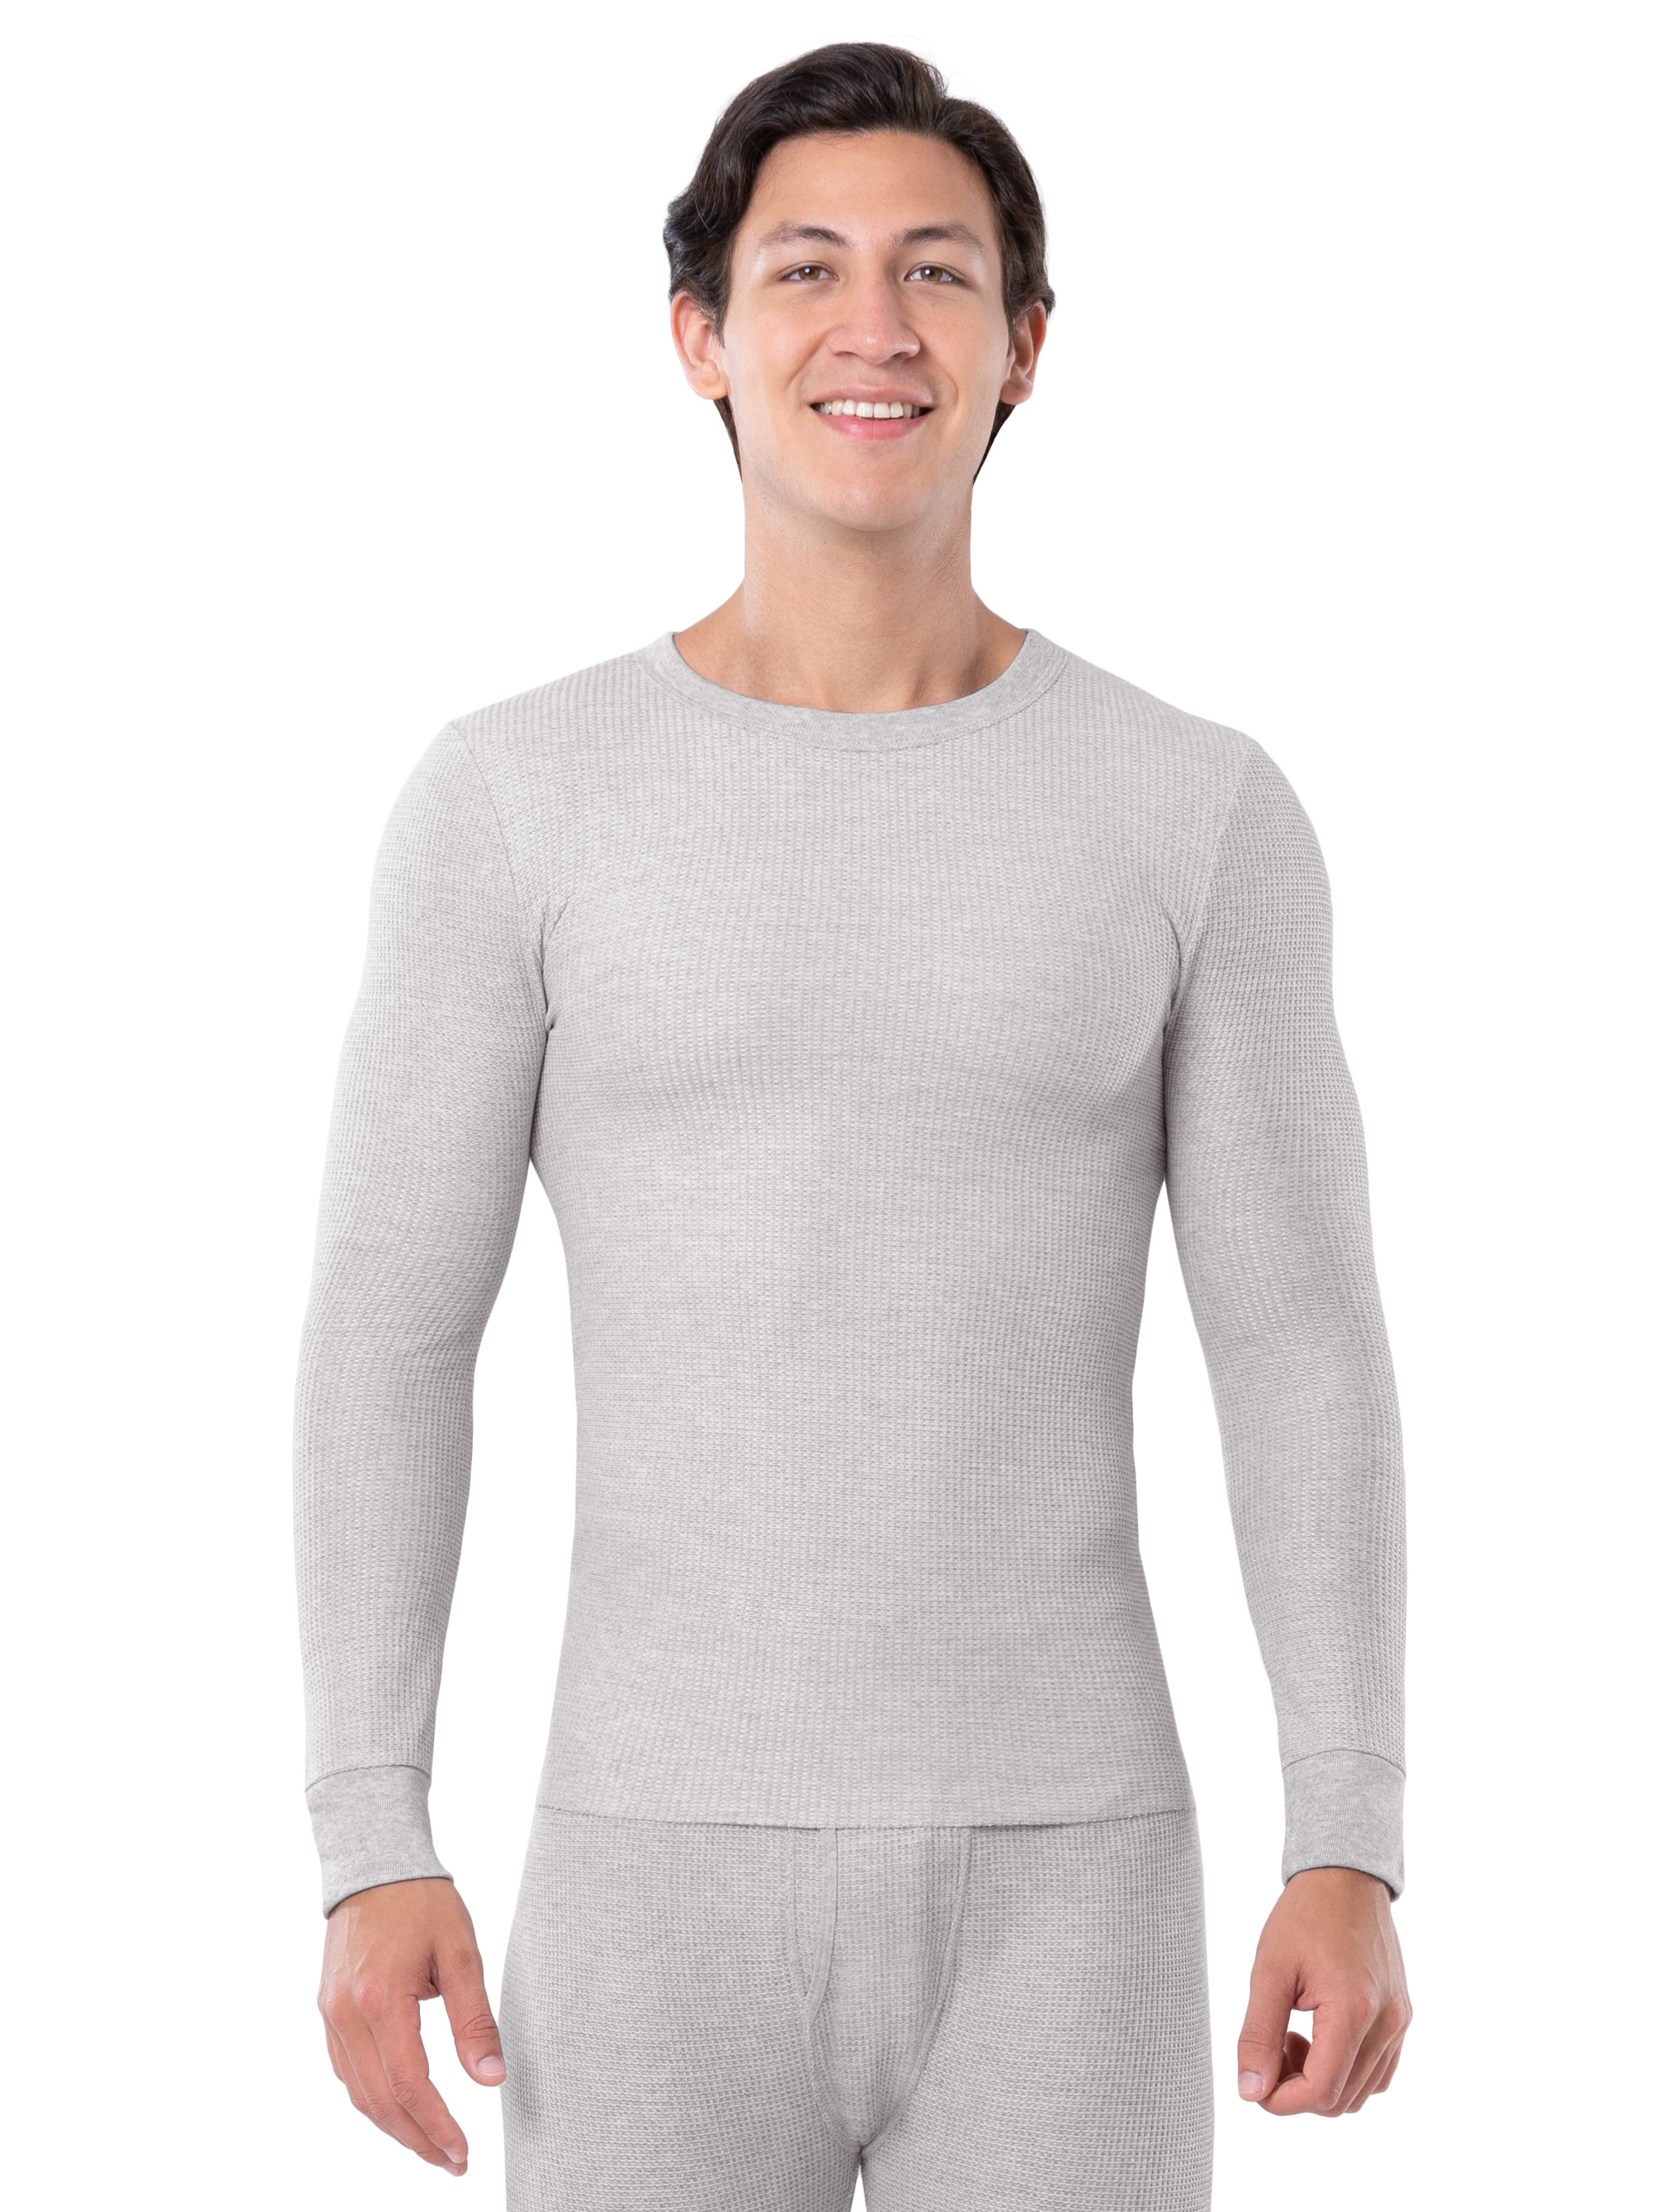 Fruit of The loom Men's Waffle Baselayer Crew Neck Thermal Top - image 1 of 8